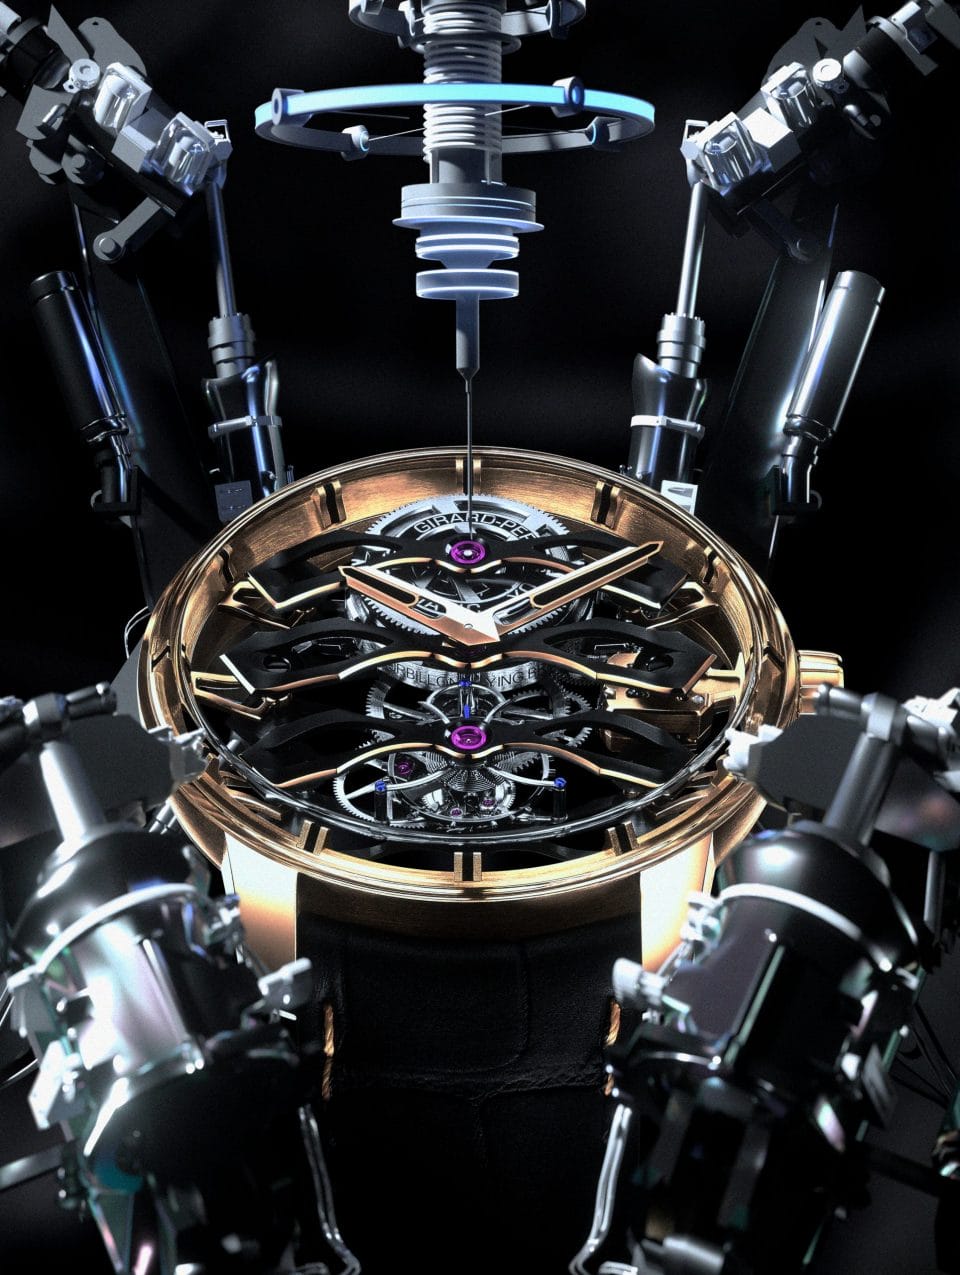 Skeleton Watches Intrigue With Its Exposed Beauty